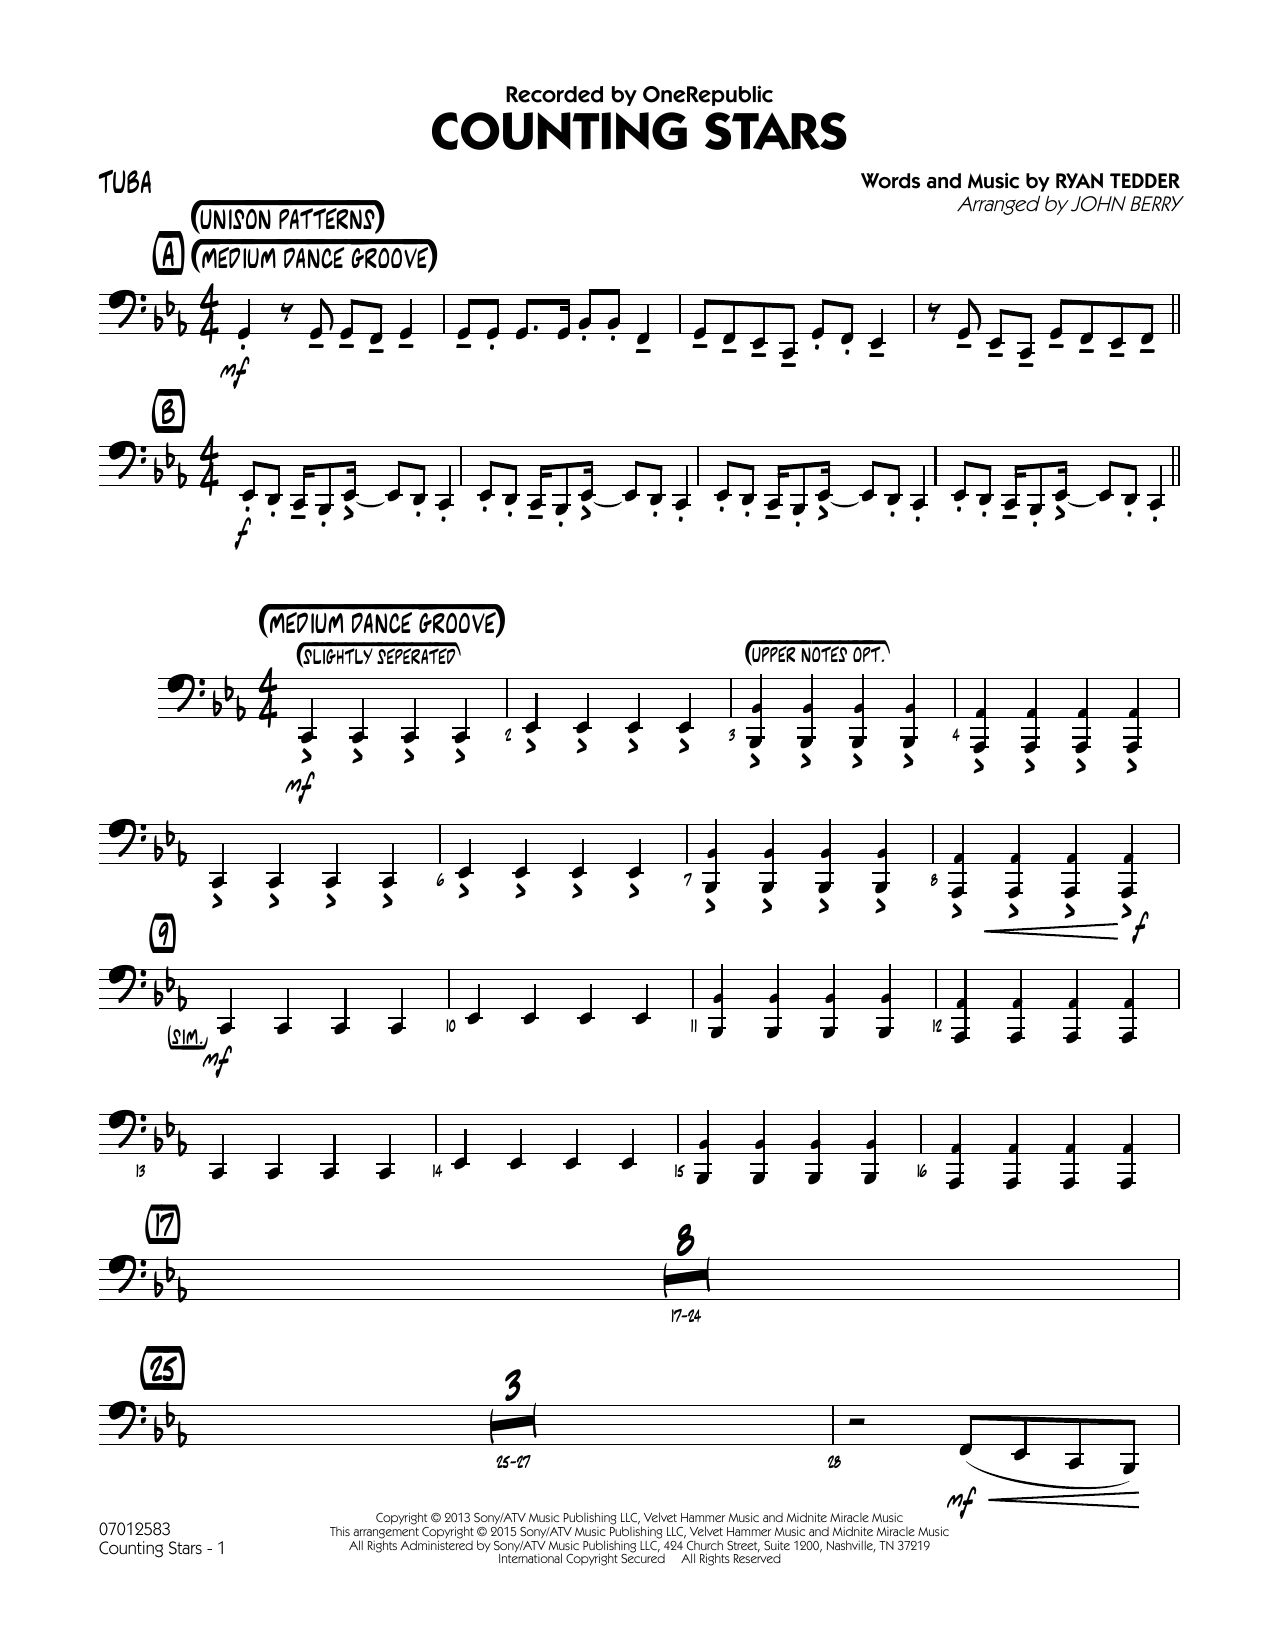 John Berry Counting Stars - Tuba sheet music notes and chords. Download Printable PDF.